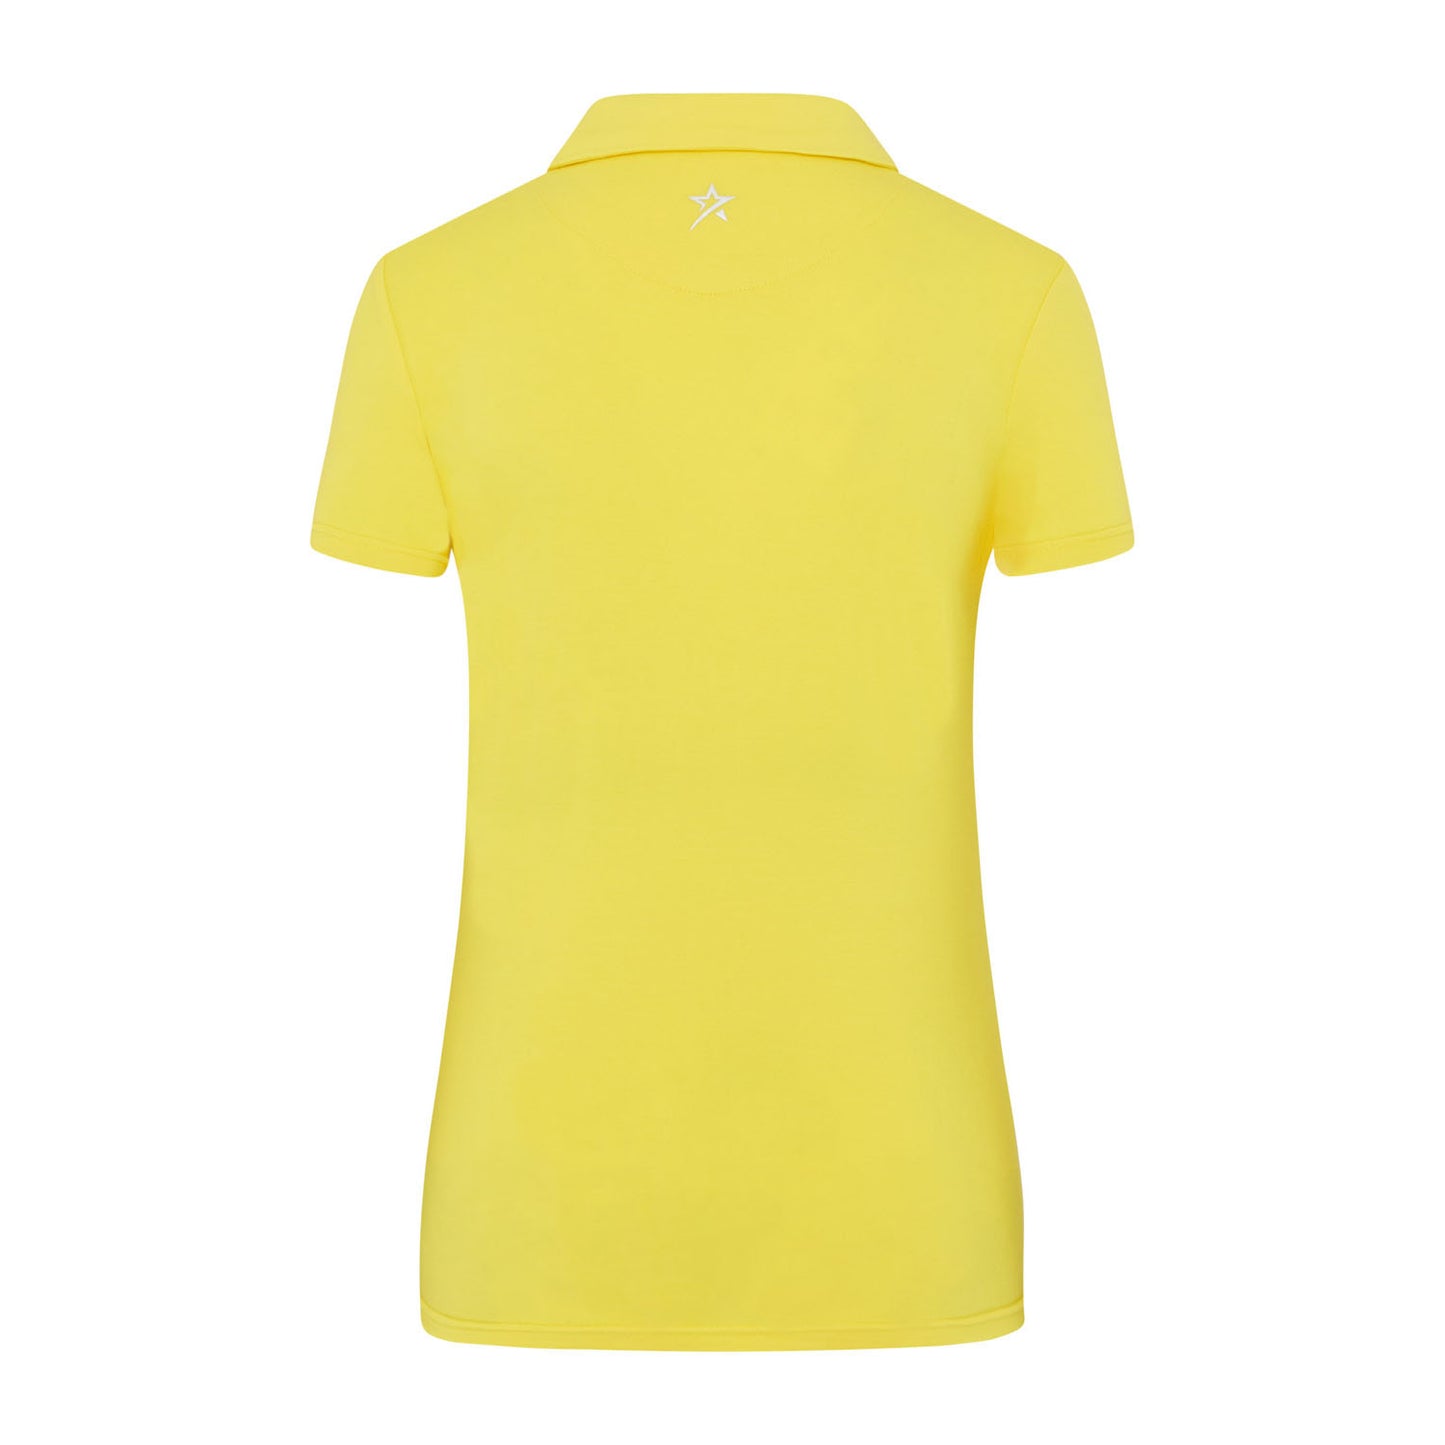 Swing Out Sister Ladies Ultra-Soft Stretch Short Sleeve Polo in Sunshine